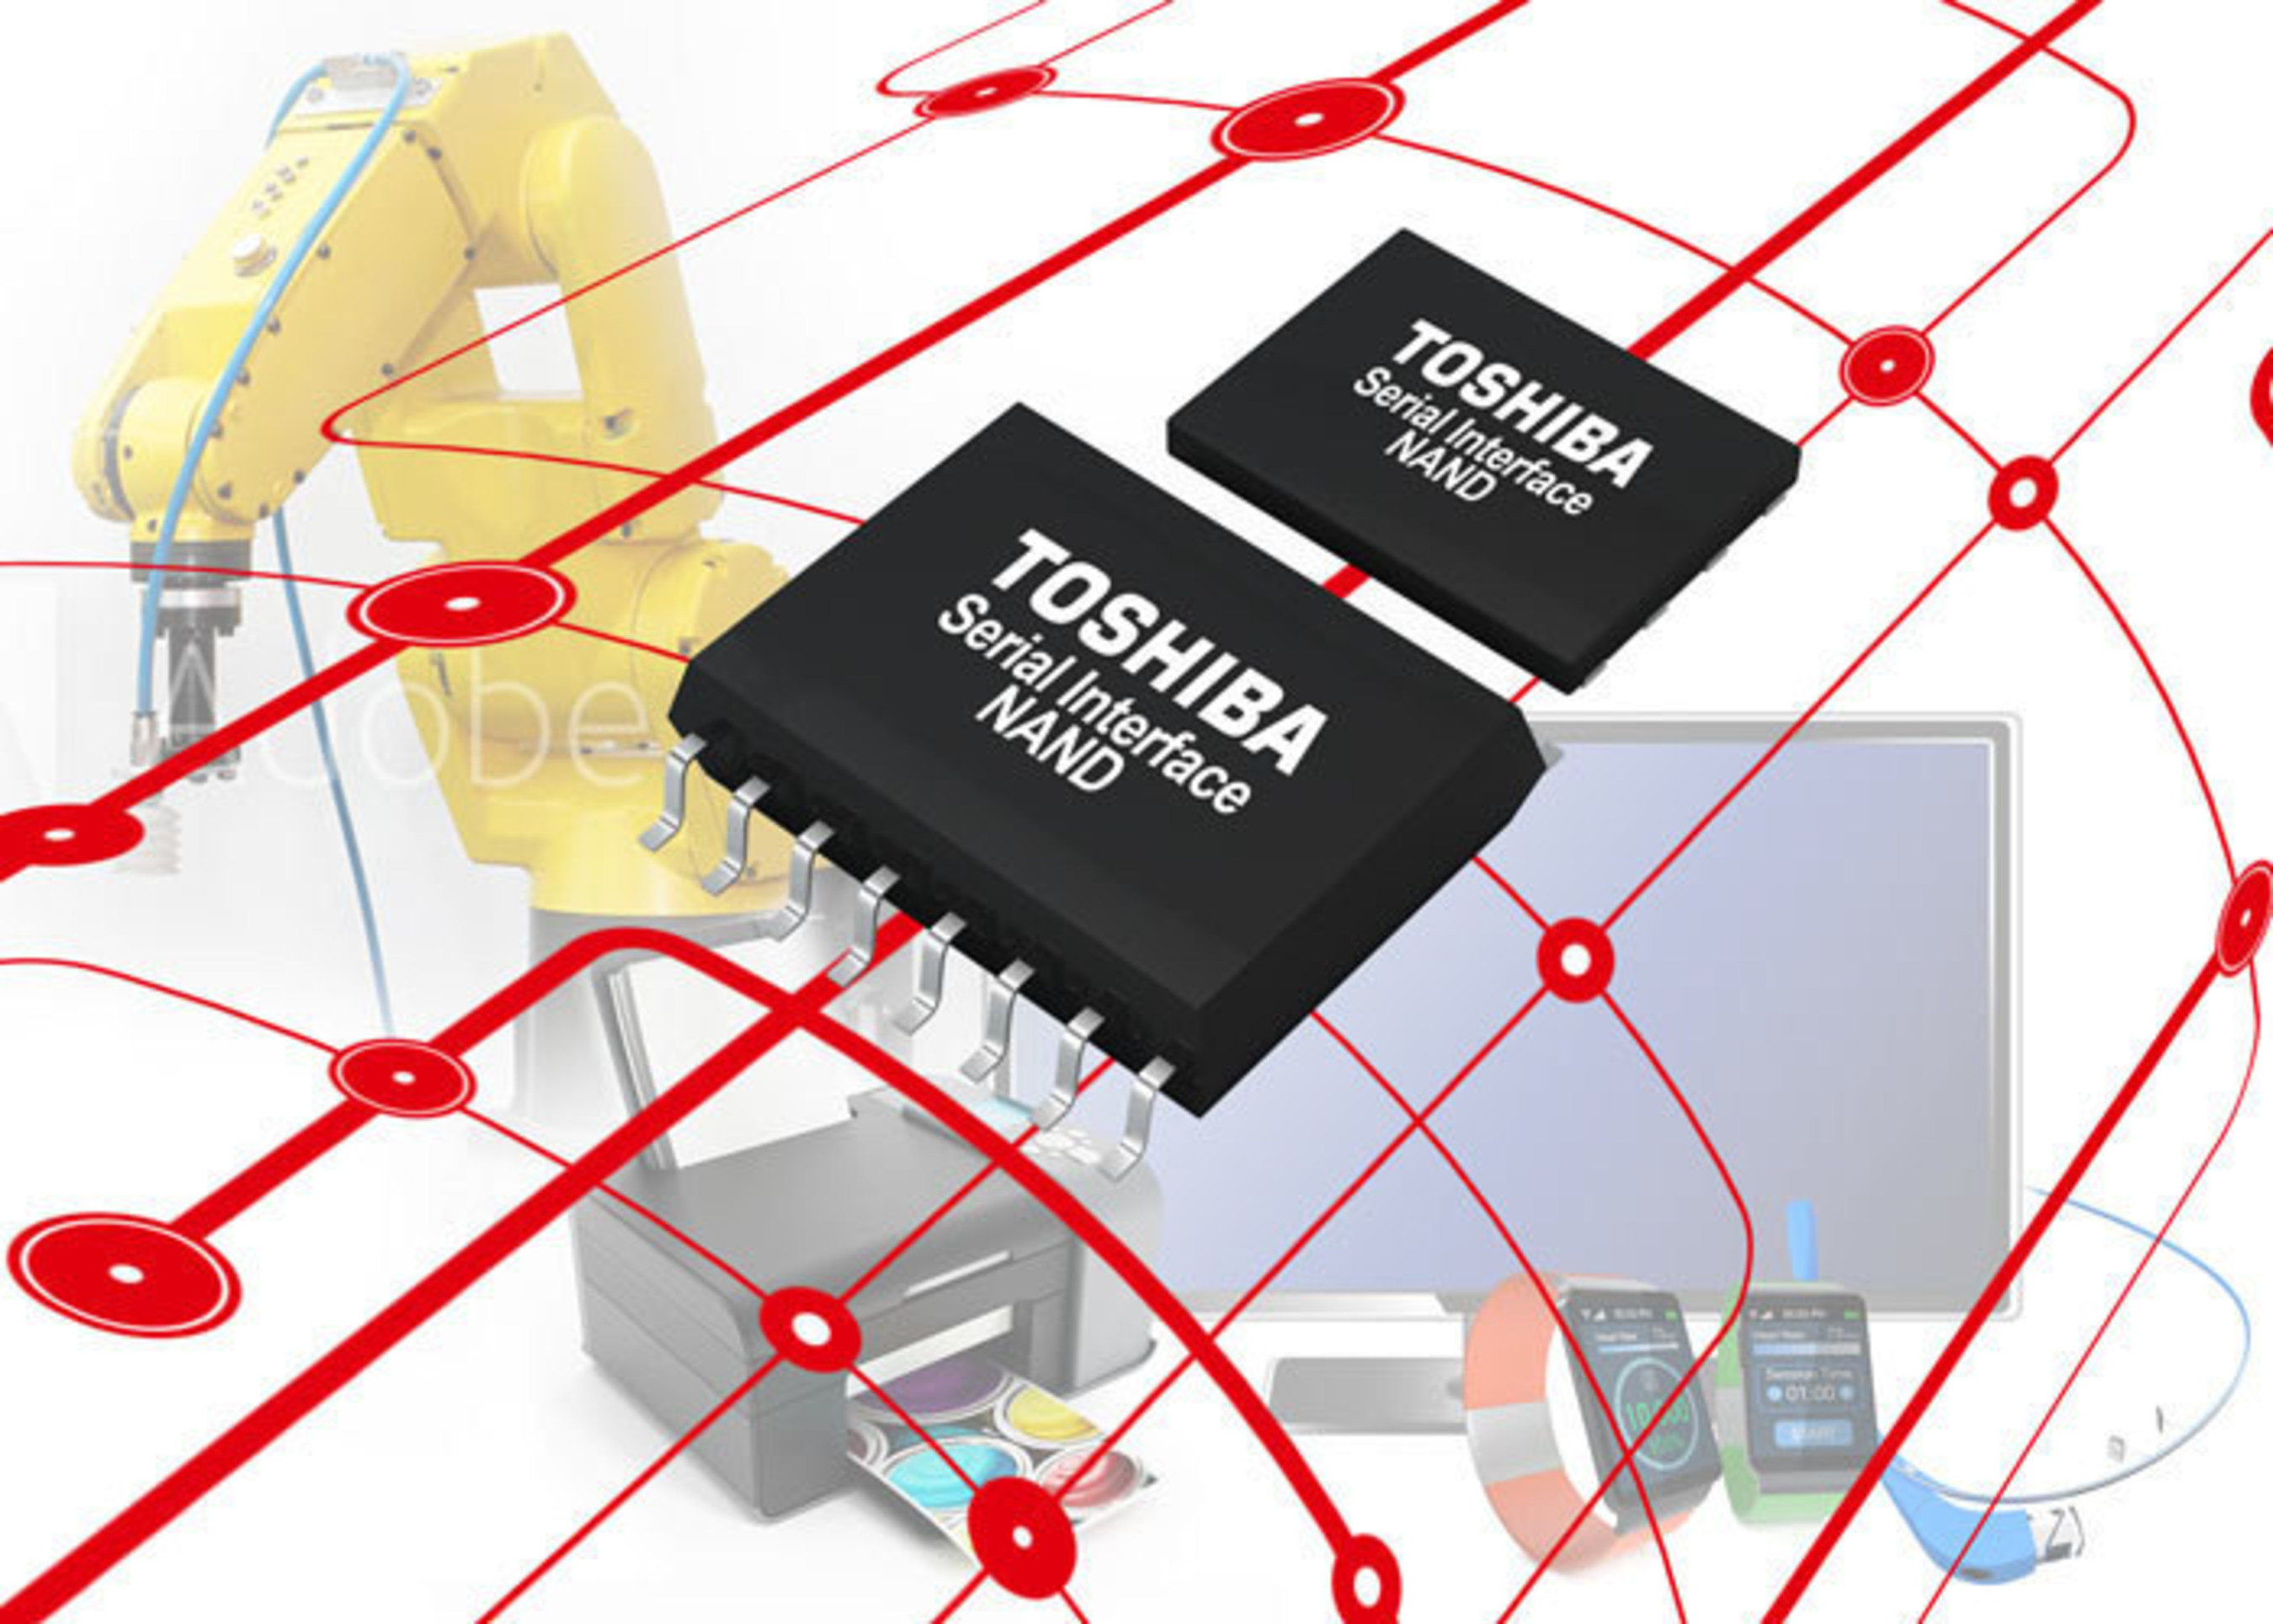 Toshiba has debuted a new family of NAND flash memory products for embedded applications: Serial Interface NAND